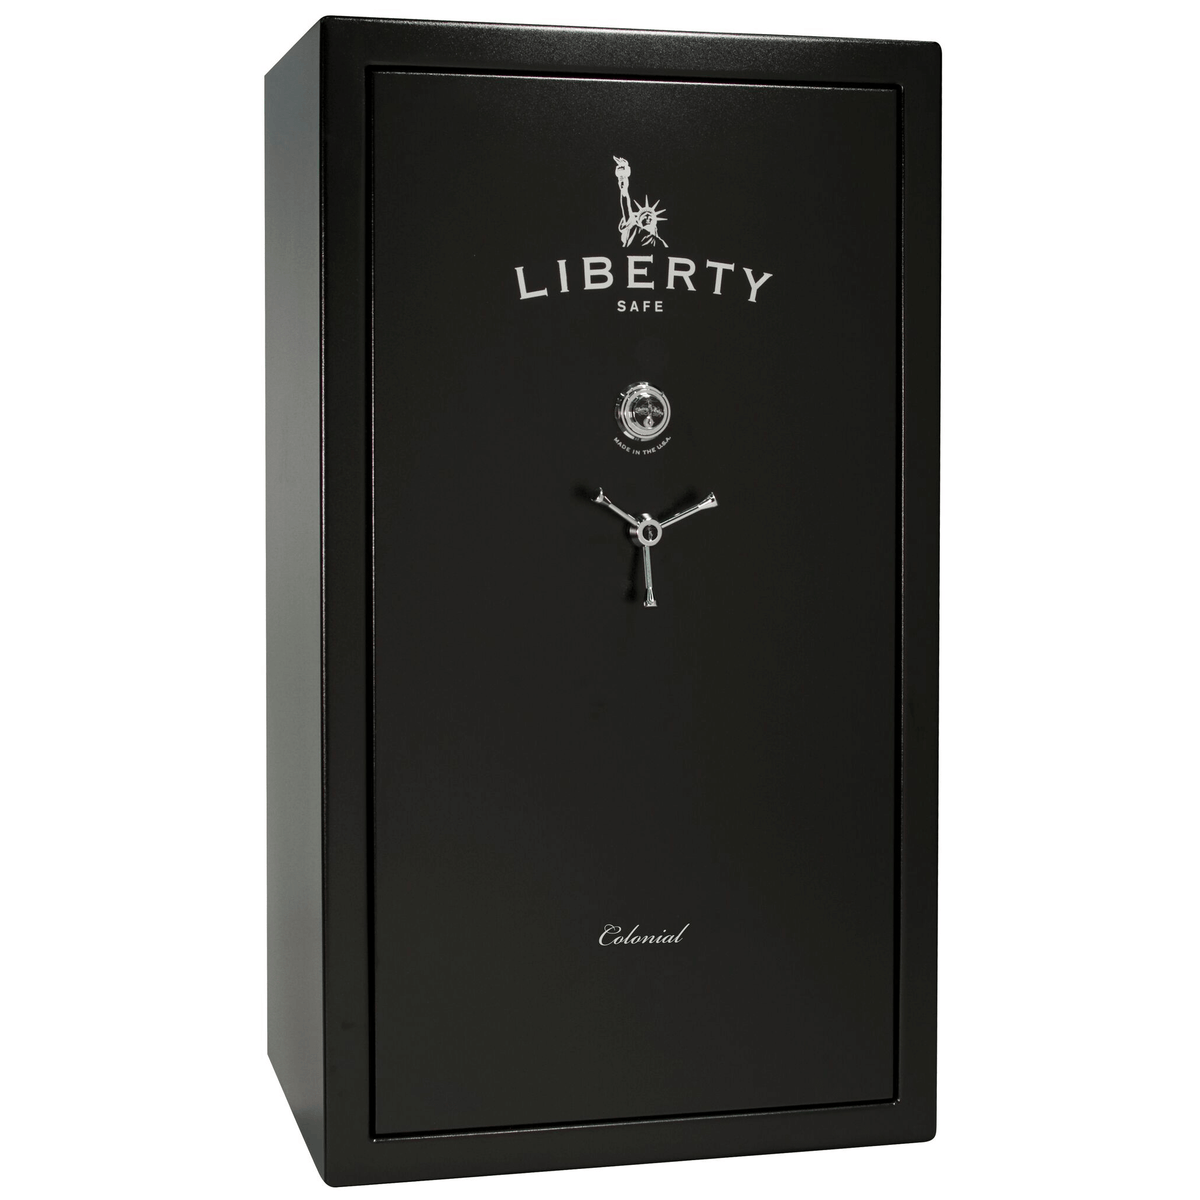 Liberty Colonial 50 Safe in Black Gloss with Chrome Mechanical Lock.